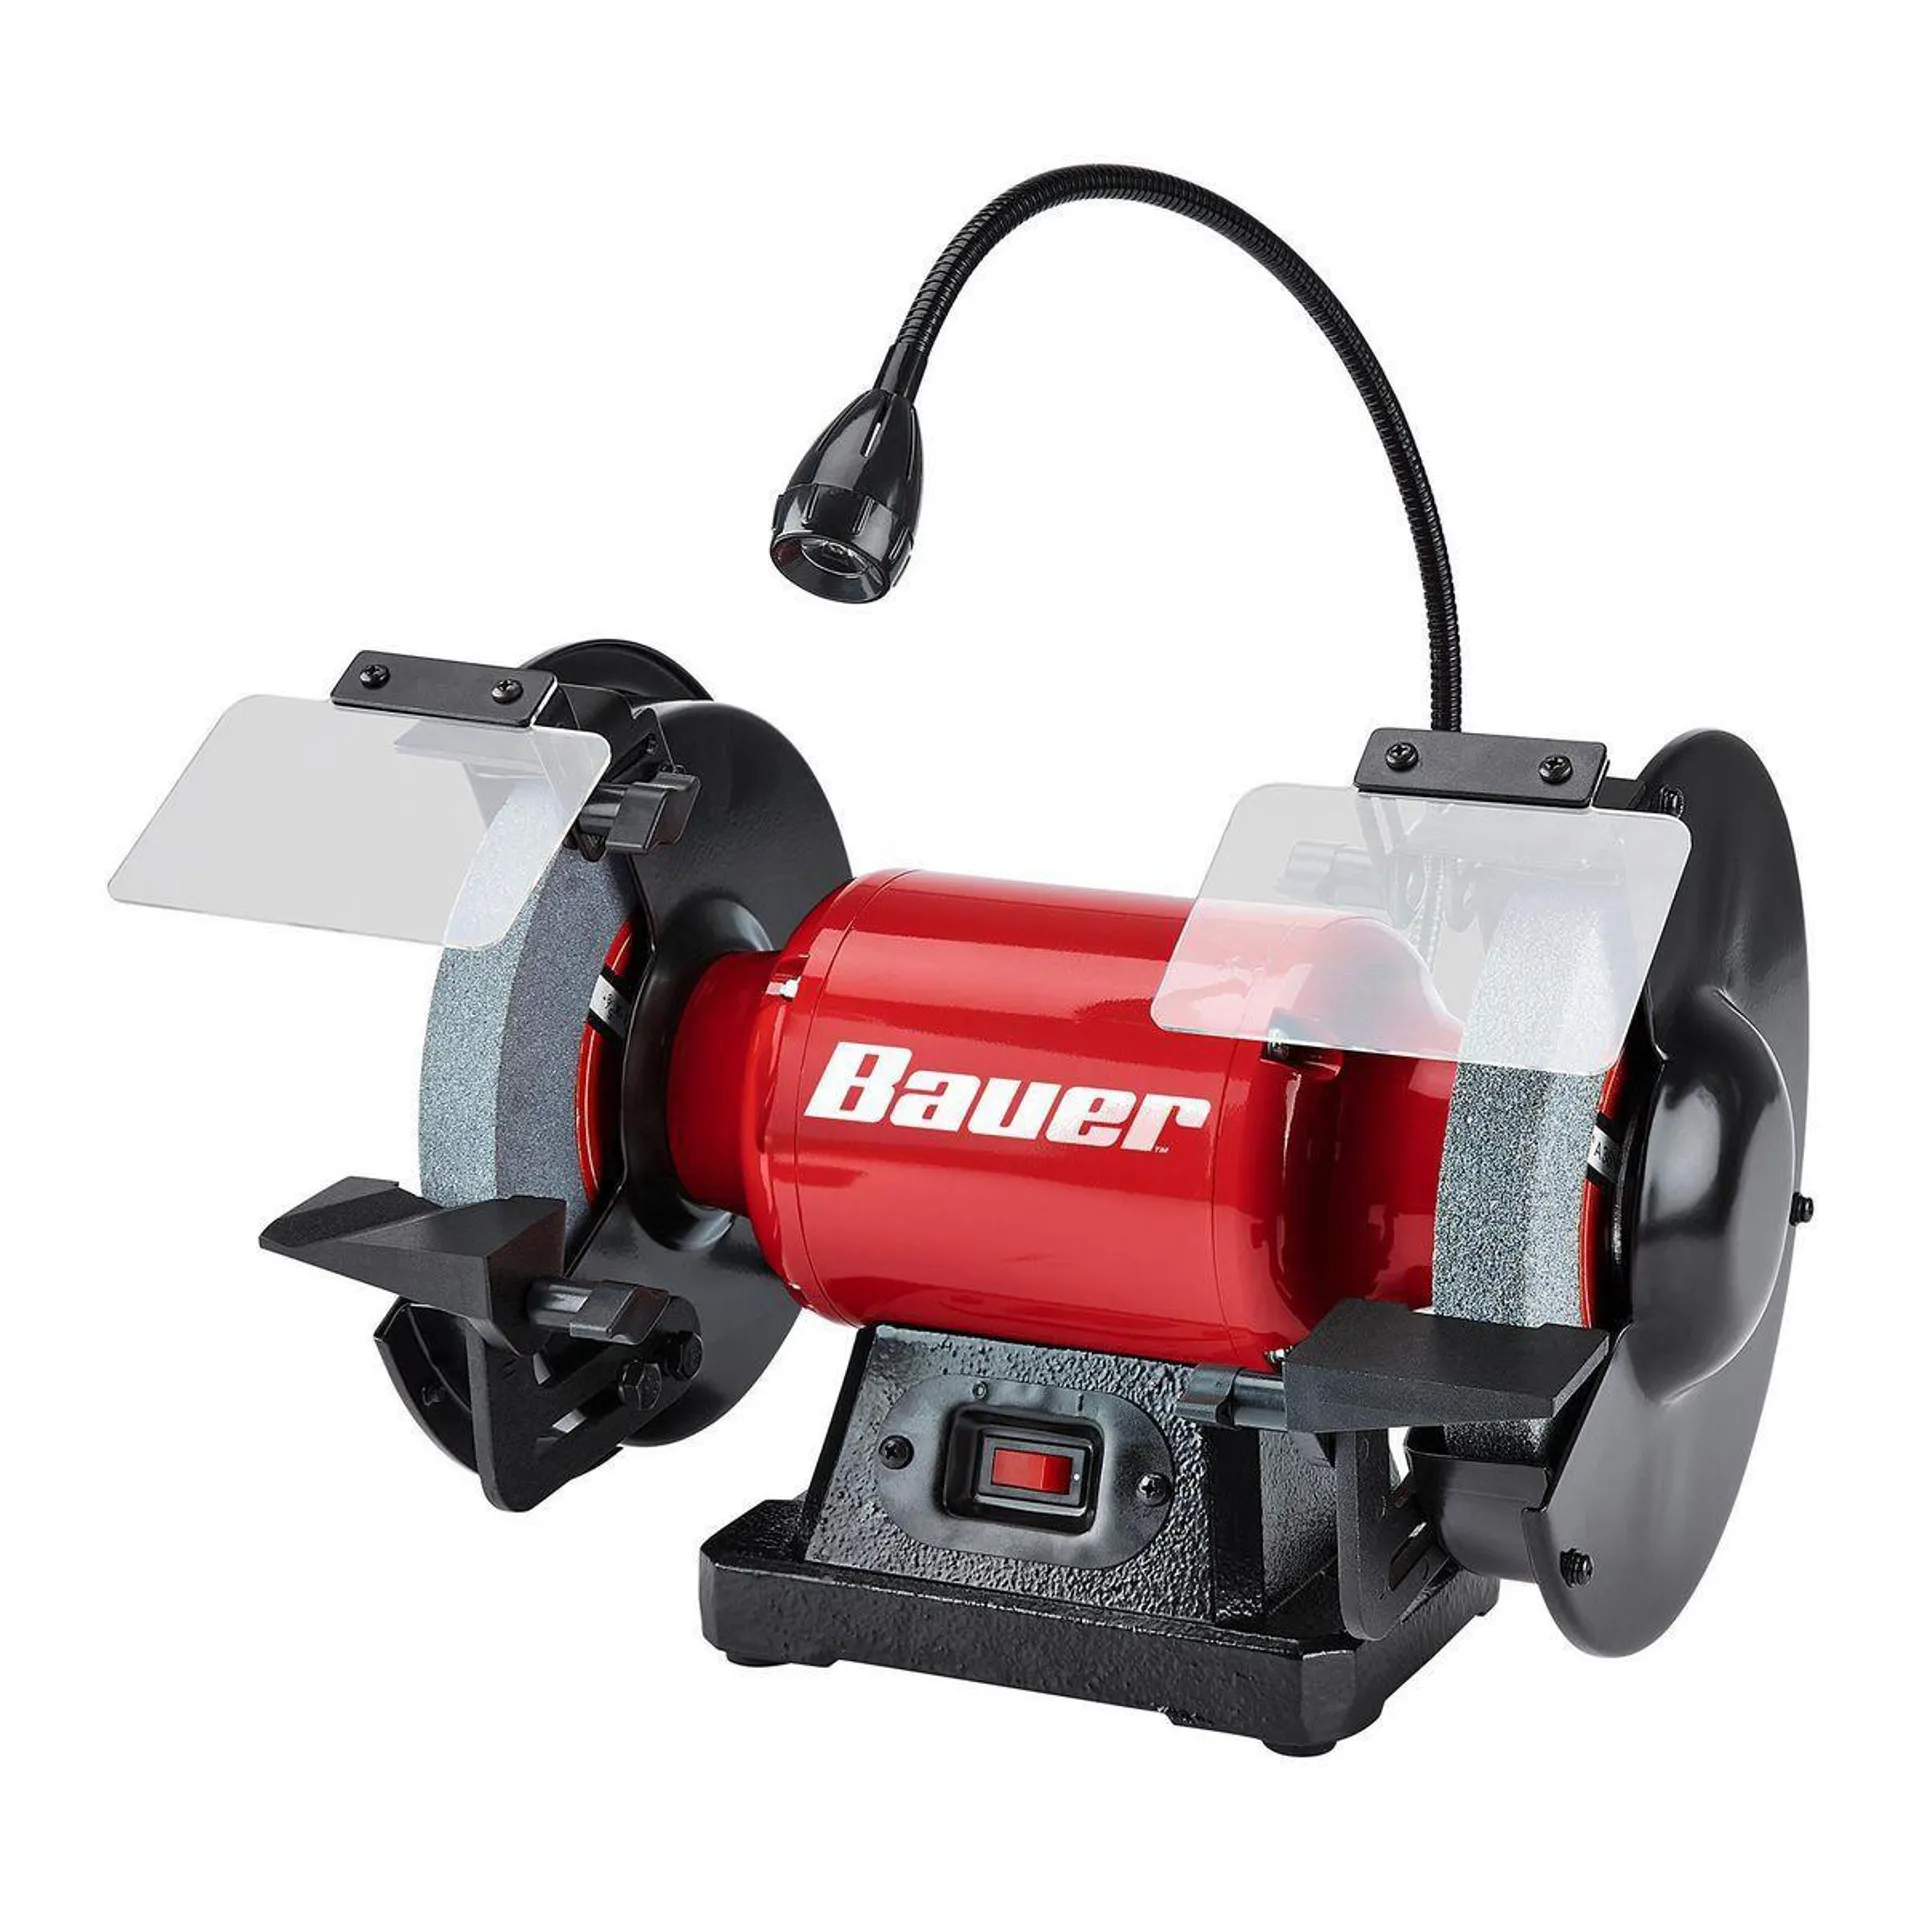 8 in. Bench Grinder with LED Light